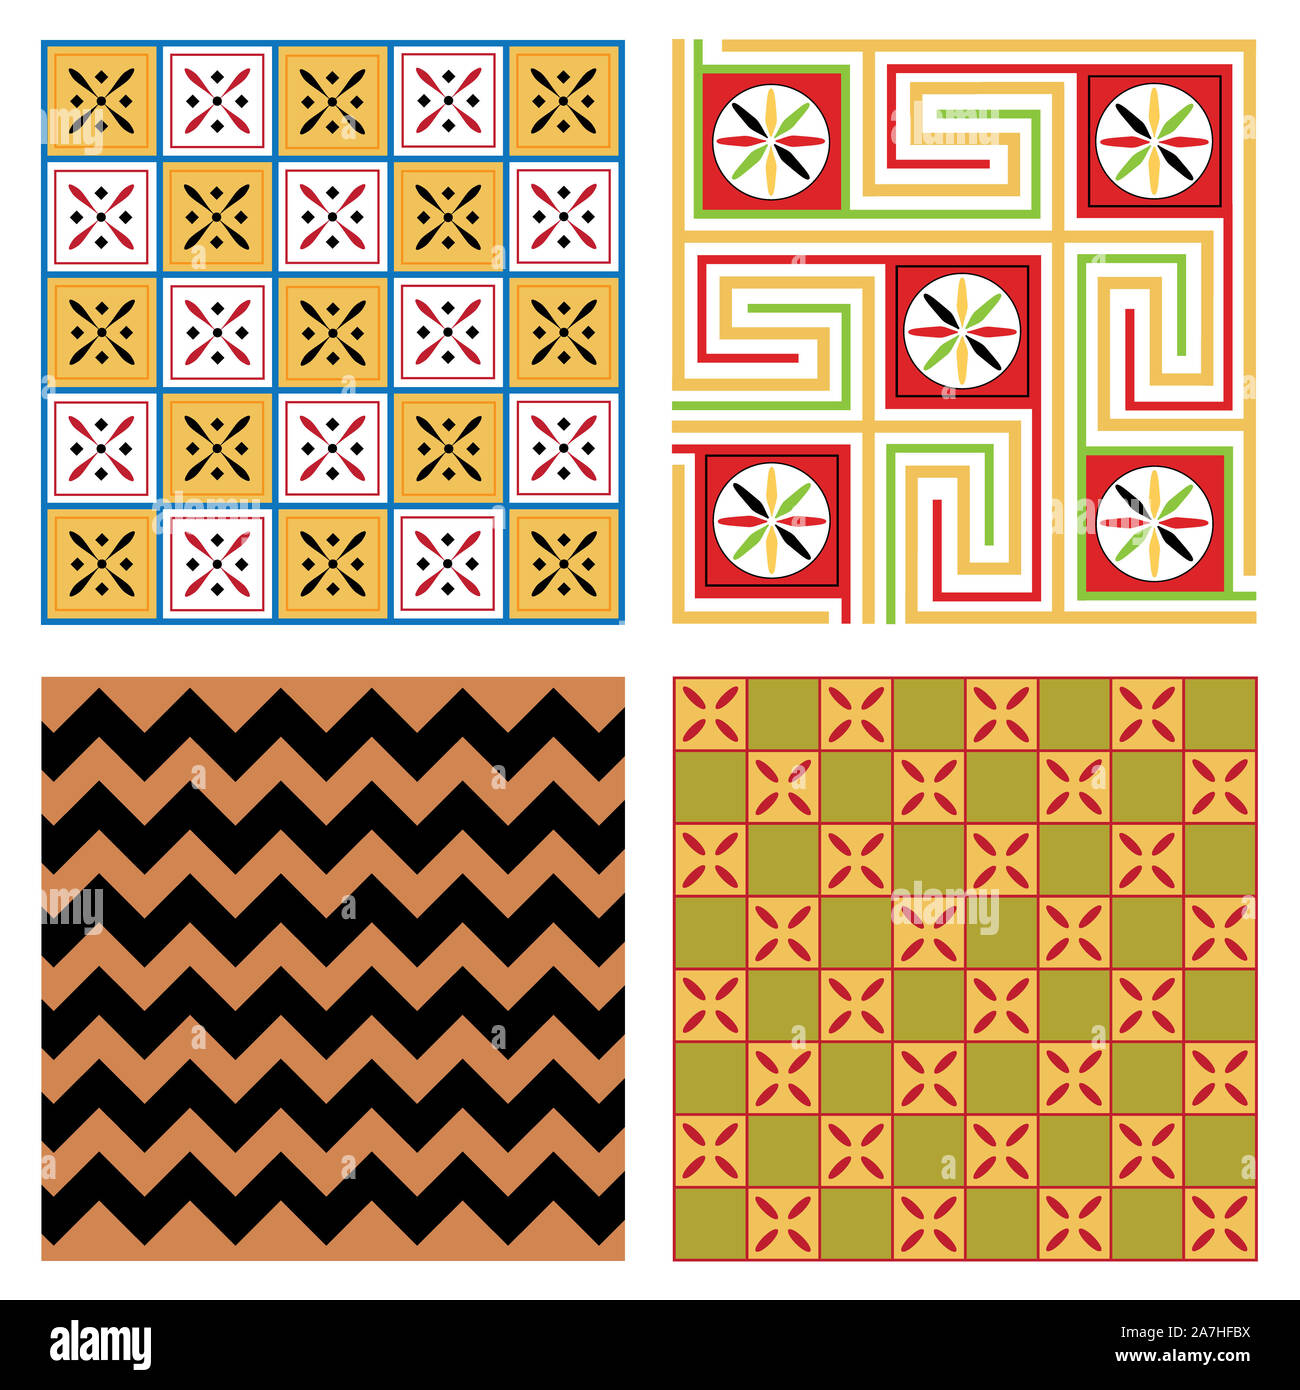 Egypt national ornament pattern volume 4. Egyptian decorative textile elements background. African culture fabric design. Stock Photo